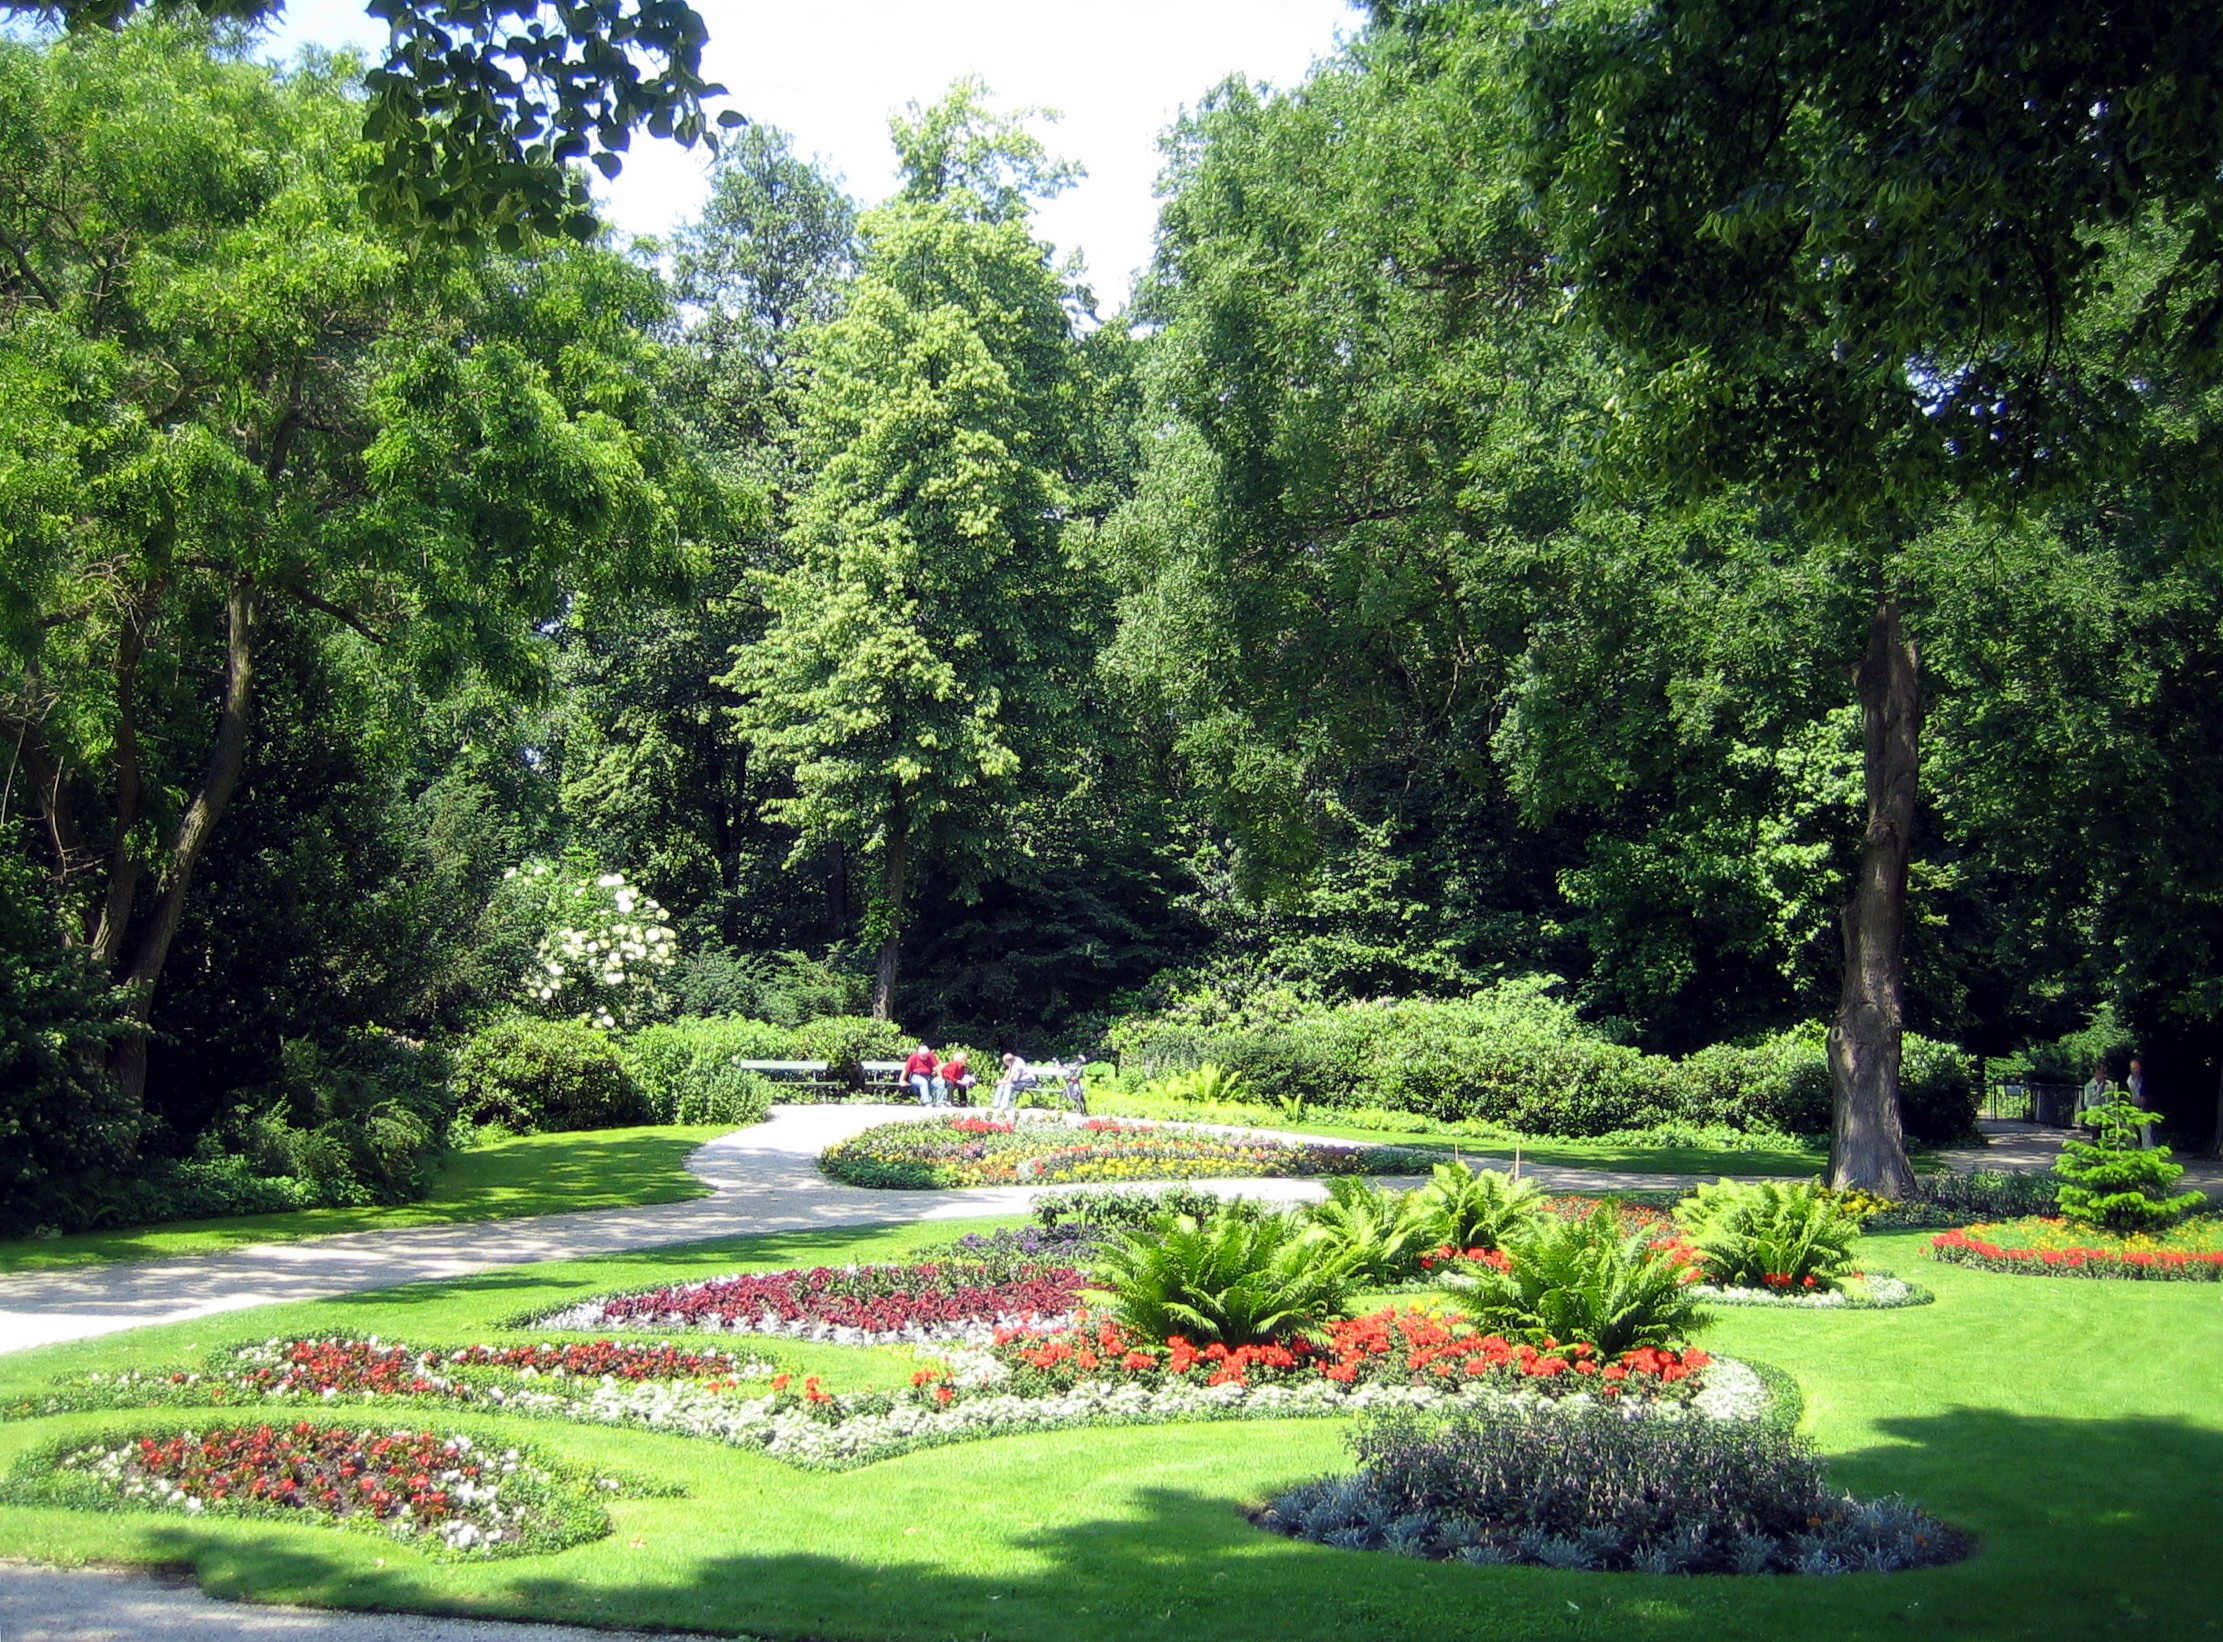 List Of Parks And Gardens In Berlin Wikipedia